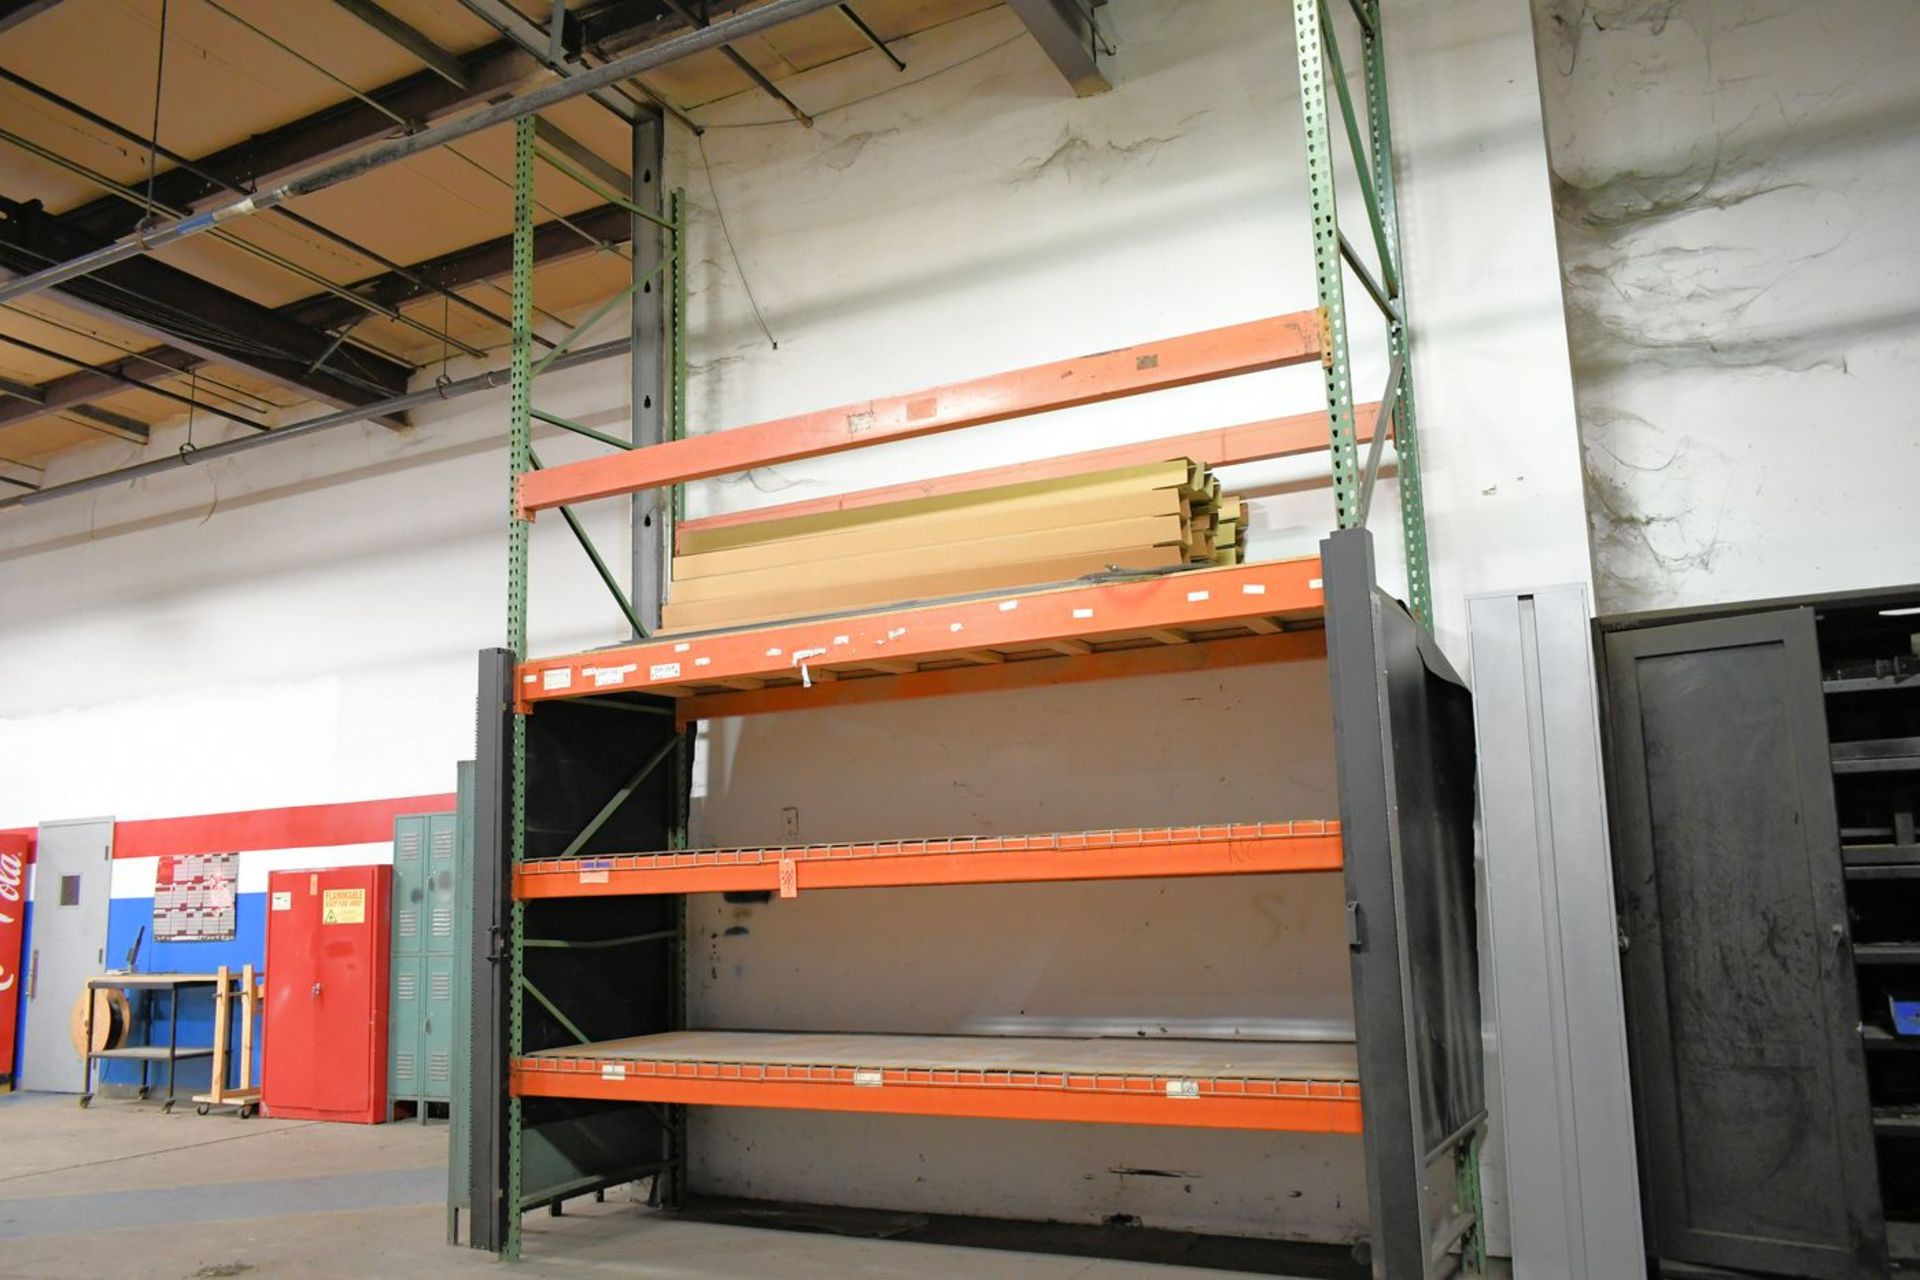 Lot - (1) 11' x 42" x 16'H, (2) 9' x 4' x 8' Sections Pallet Racking, (Contents Not Included), (